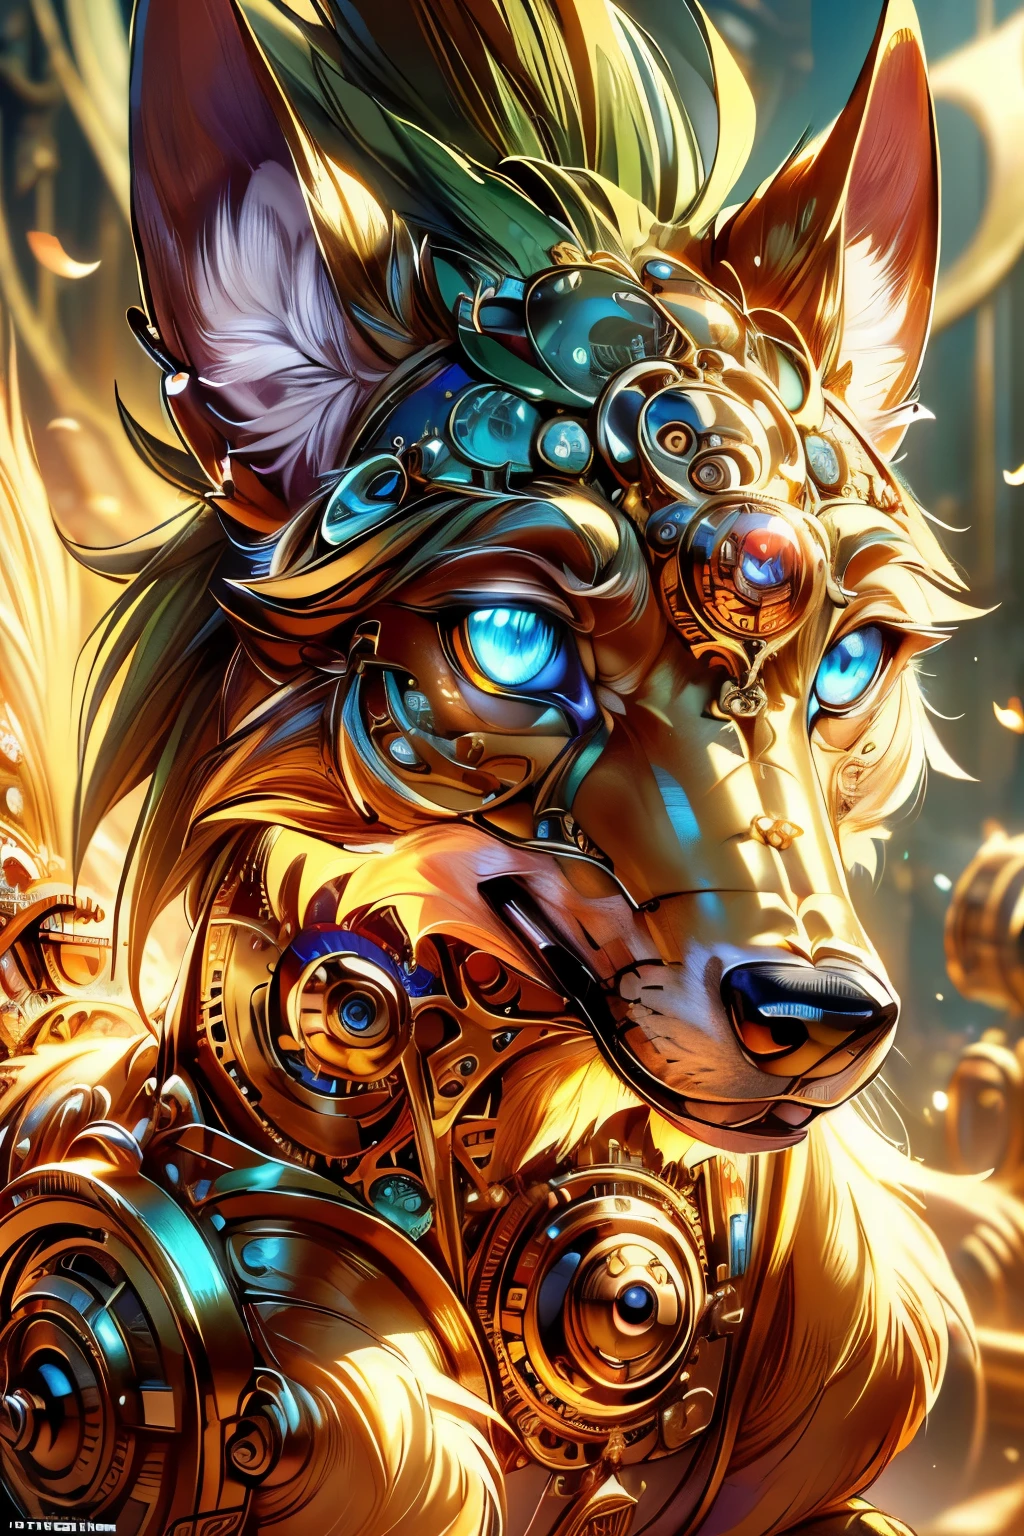 (Masterpiece, Committed to ultra-high definition and vivid colors, Super detailed, Attention to detail, highest quality, 8K, 16K, Exquisite detail, A style that combines romanticism and realism, High resolution, Perfect Anatomy), Wolf, steampunk, Illustration of intricate gears, in focus with blurred background